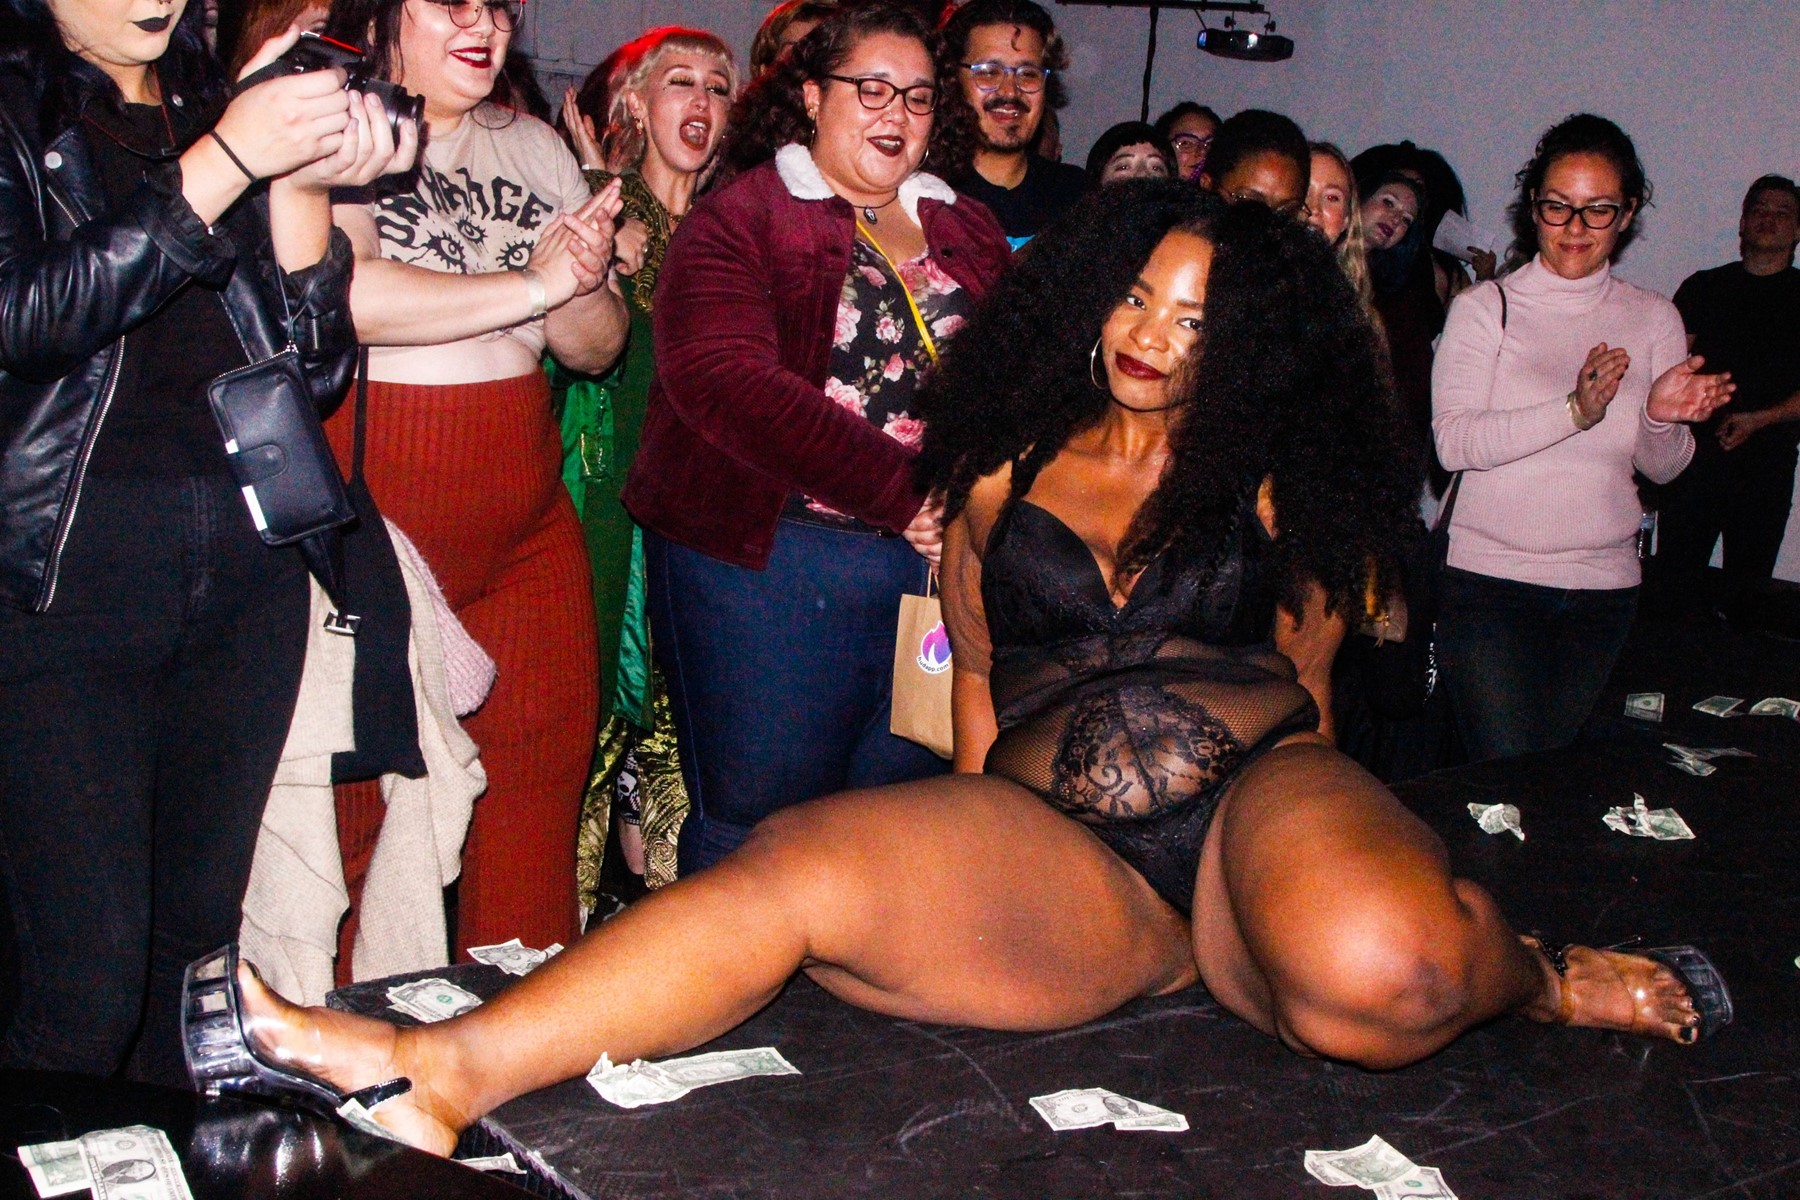 The body positive LA strip show founded by plus size women Dazed picture photo